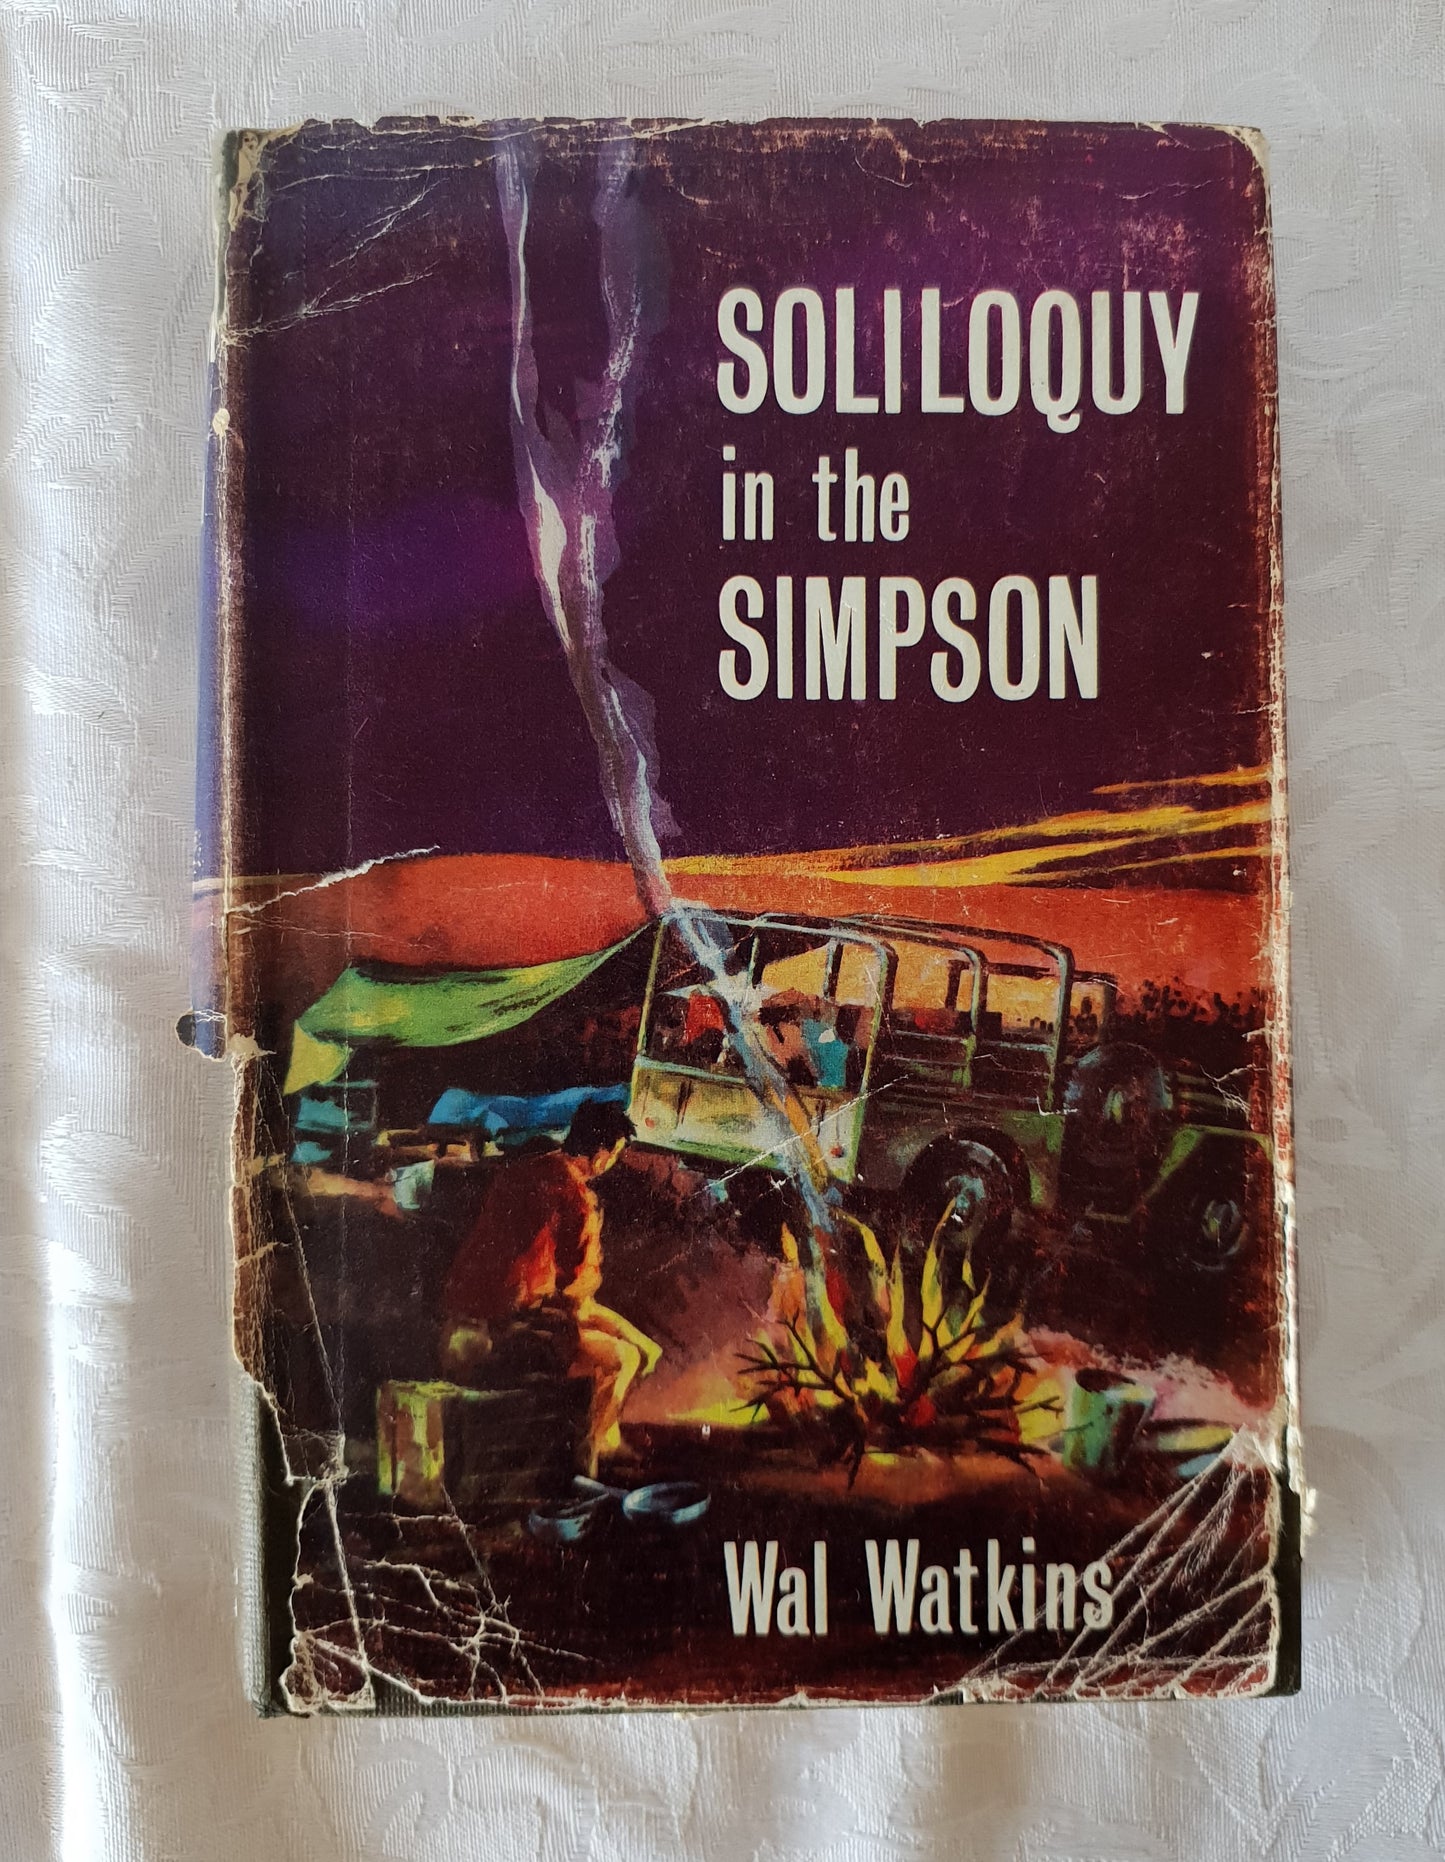 Soliloquy in the Simpson by Wal Watkins